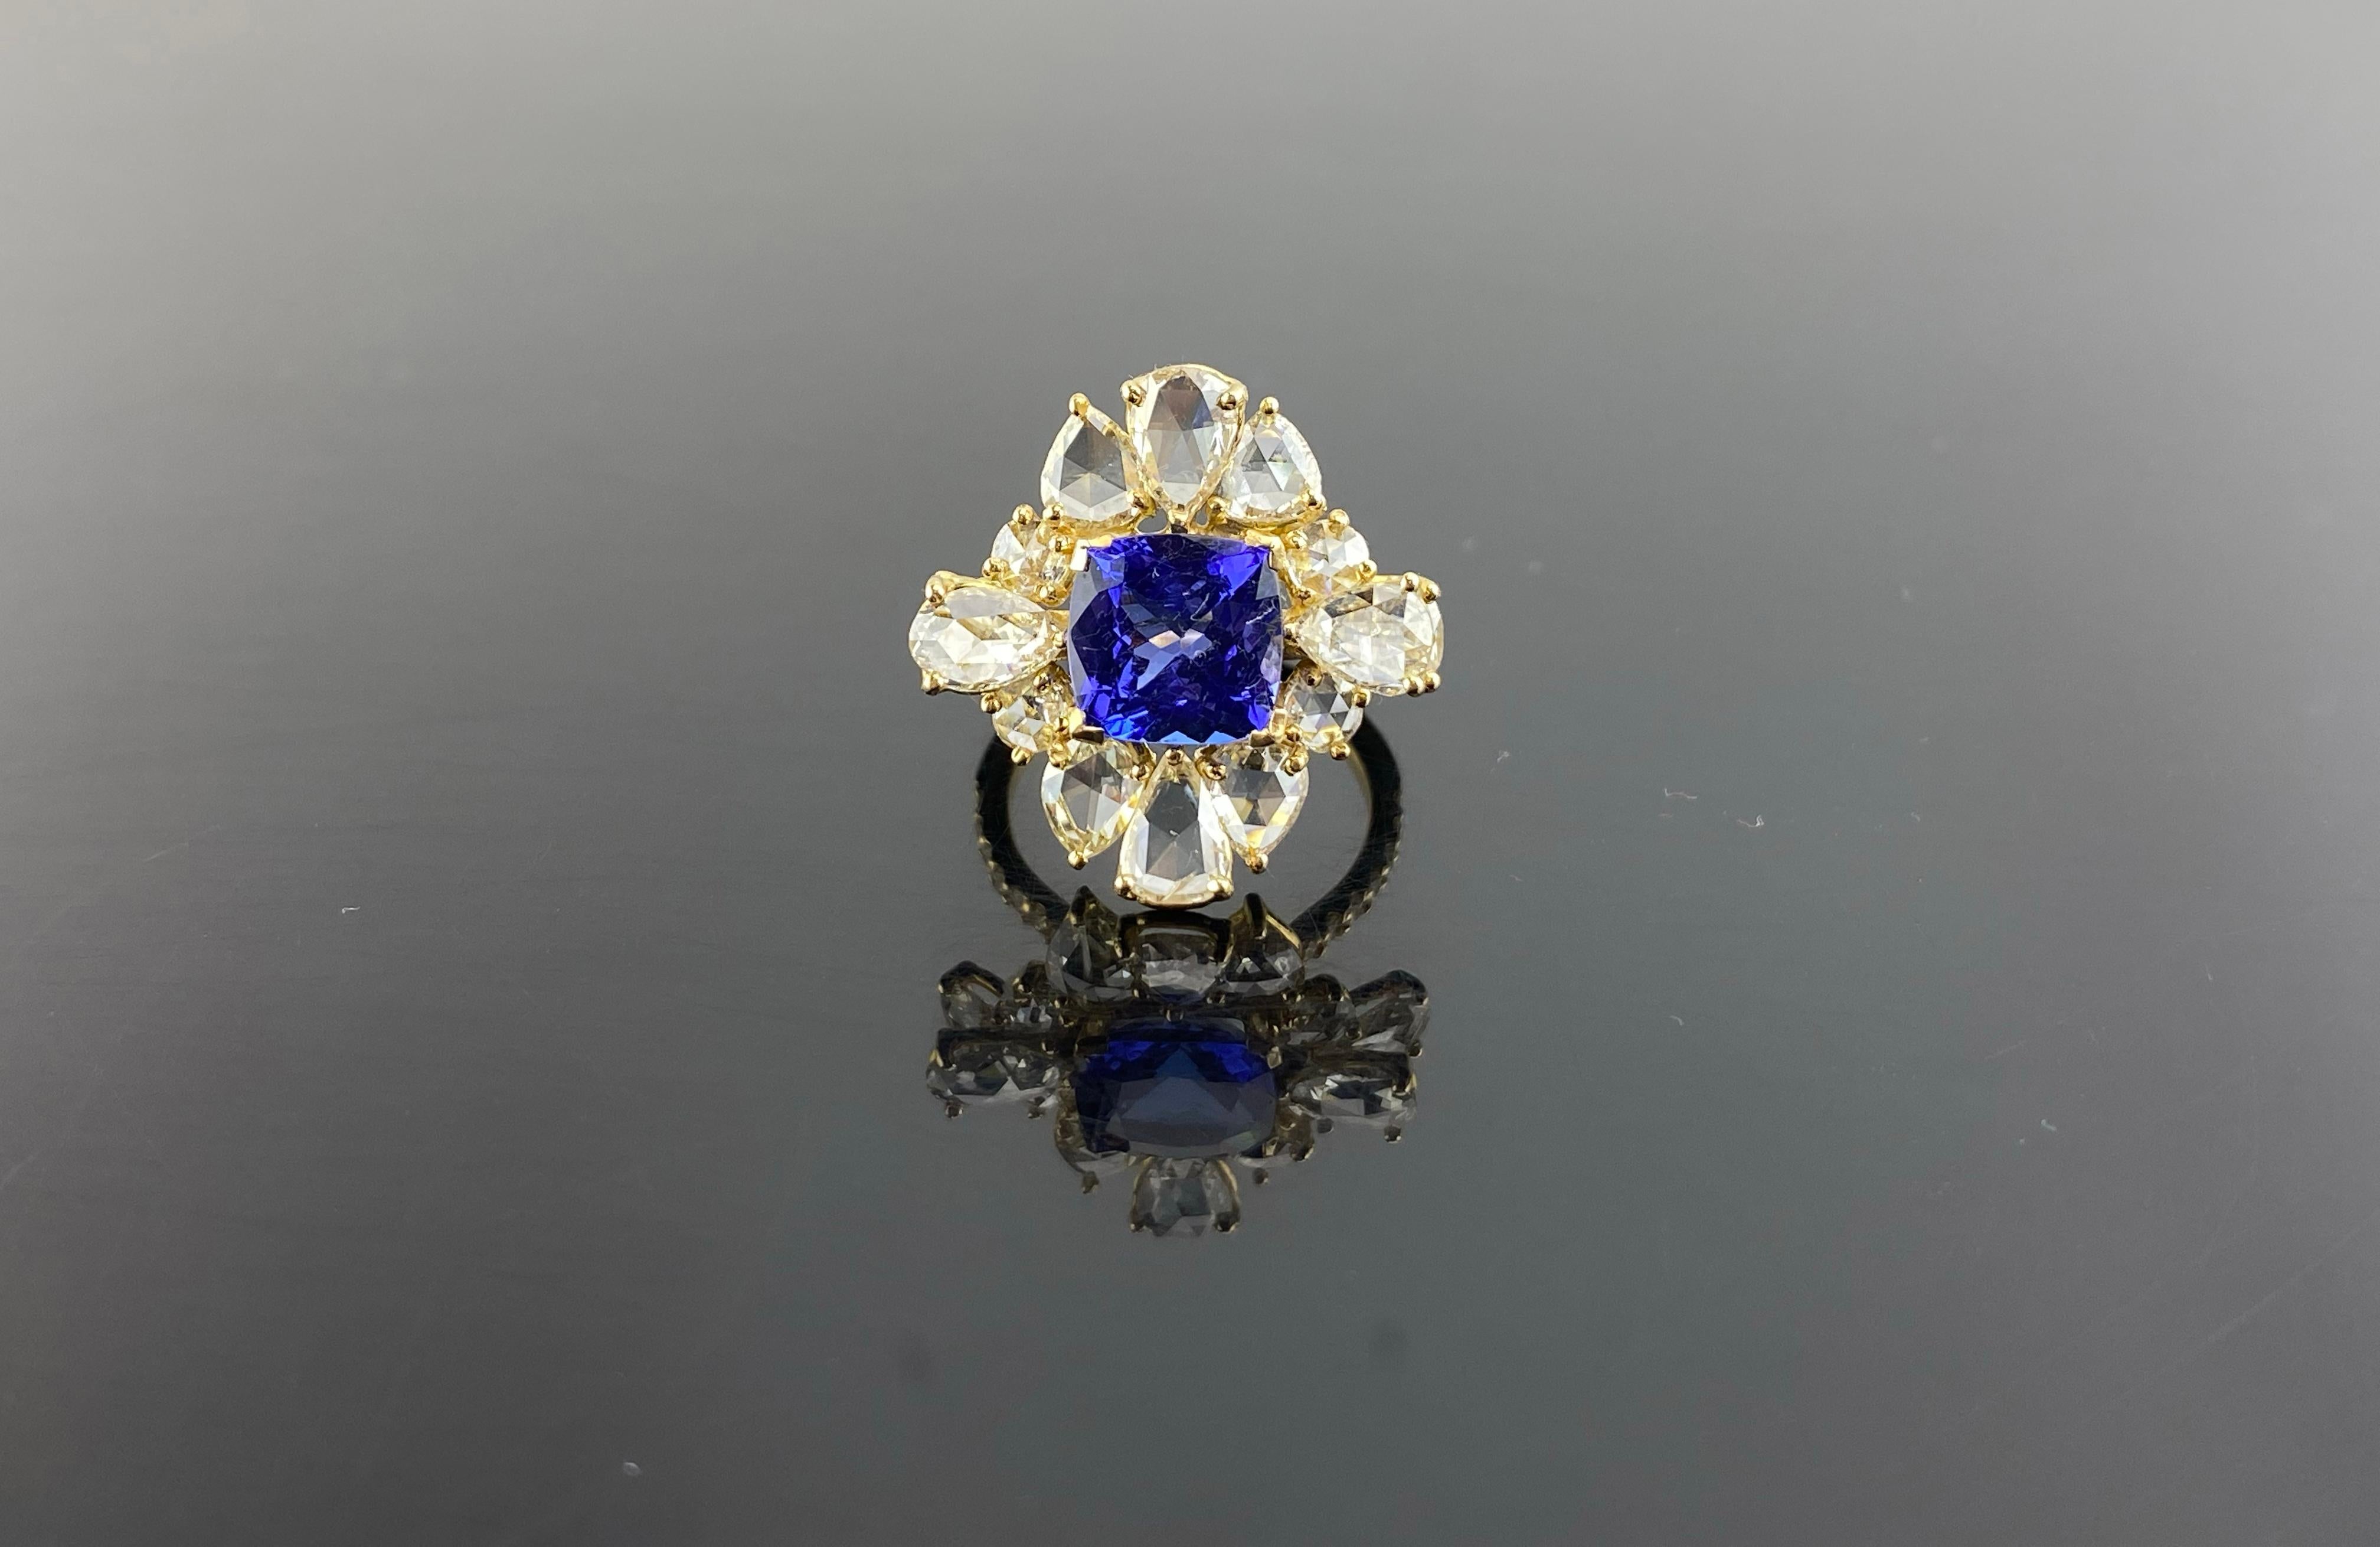 A beautiful, eye-catching 3.08 carat cushion shaped Tanzanite center stone adorned with 3.03 carat Diamonds all set in solid 18K Yellow Gold. The ring is sized at US7, can be resized. The center stone is transparent, with no inclusions and a